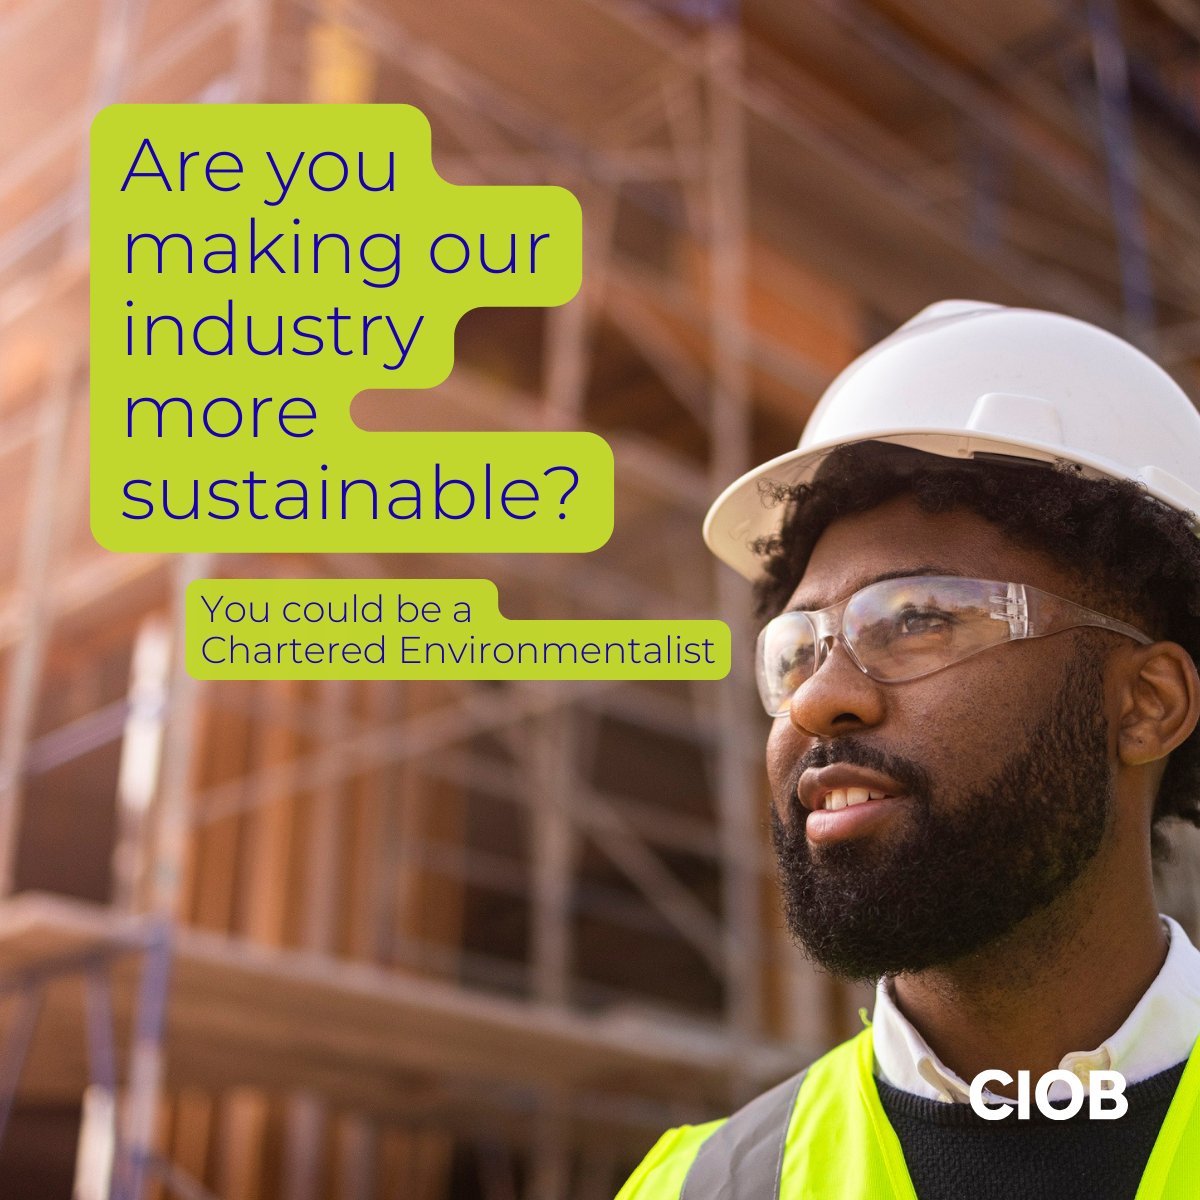 In the modern world of construction, there are many complex challenges around sustainability and our environment. Demand is growing for individuals who have the knowledge and experience to help solve these issues. Discover more at orlo.uk/8dbeI #ciob #cenv